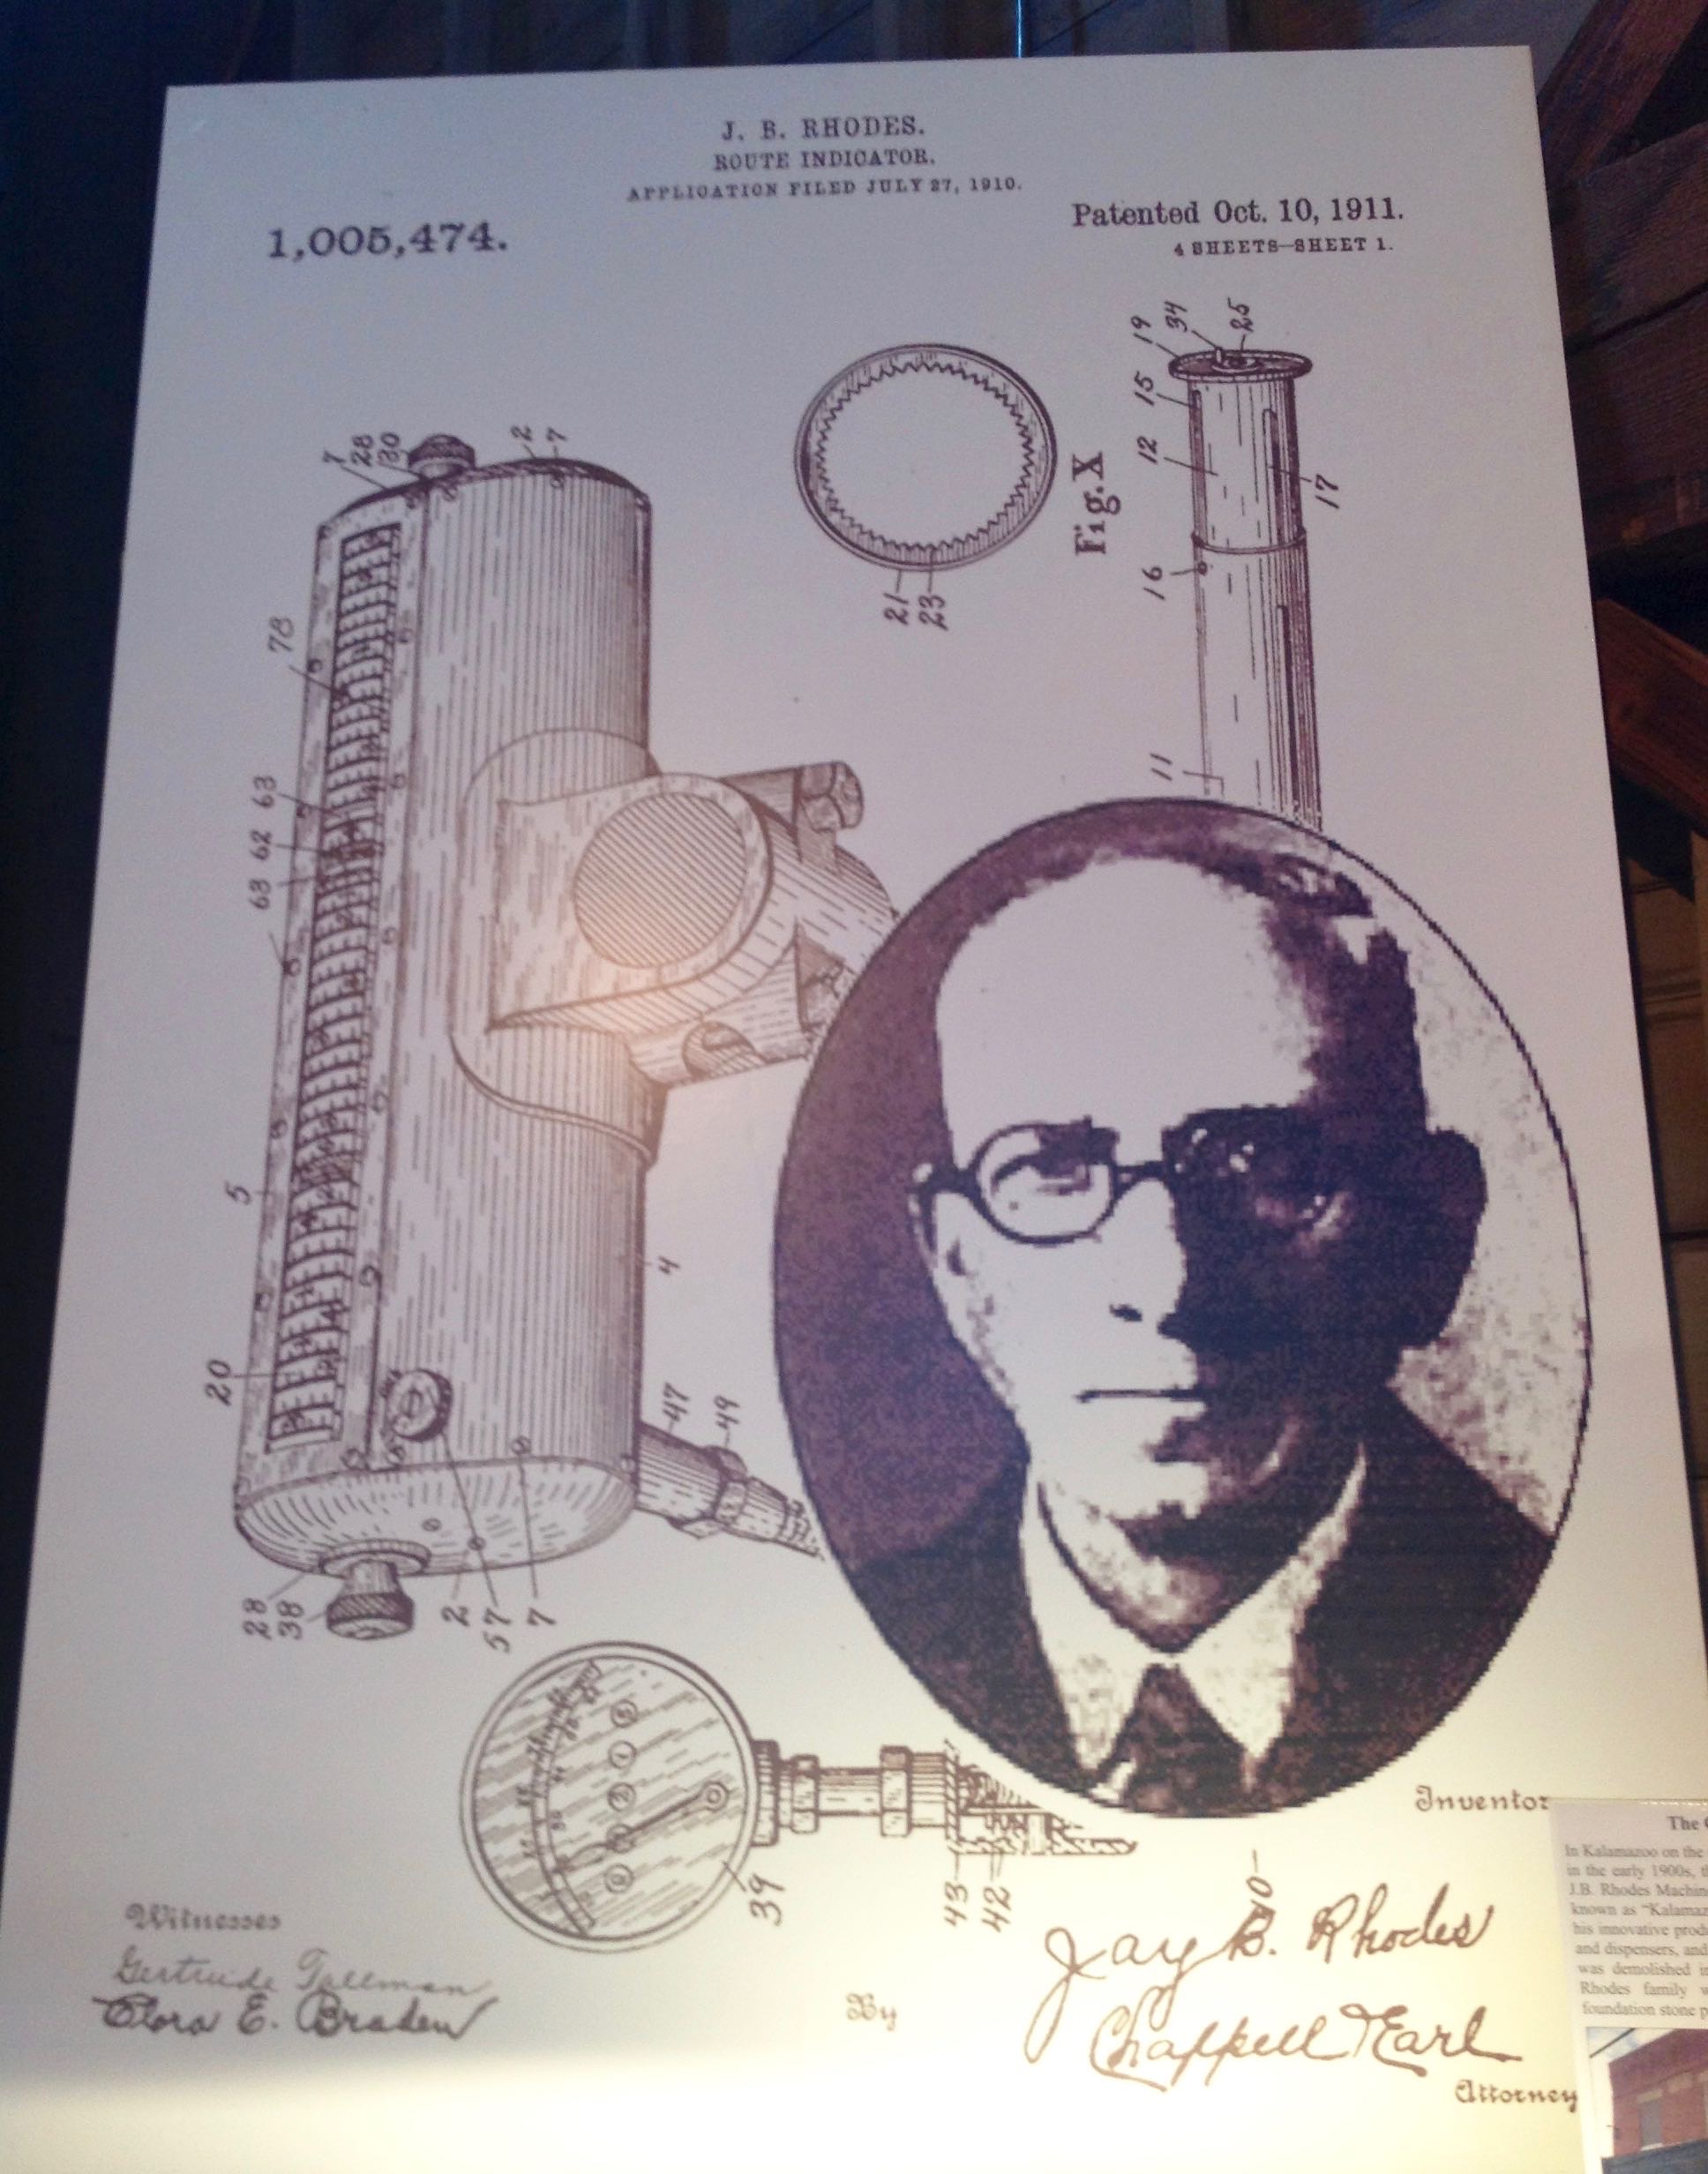 J.B. Rhodes and his patent